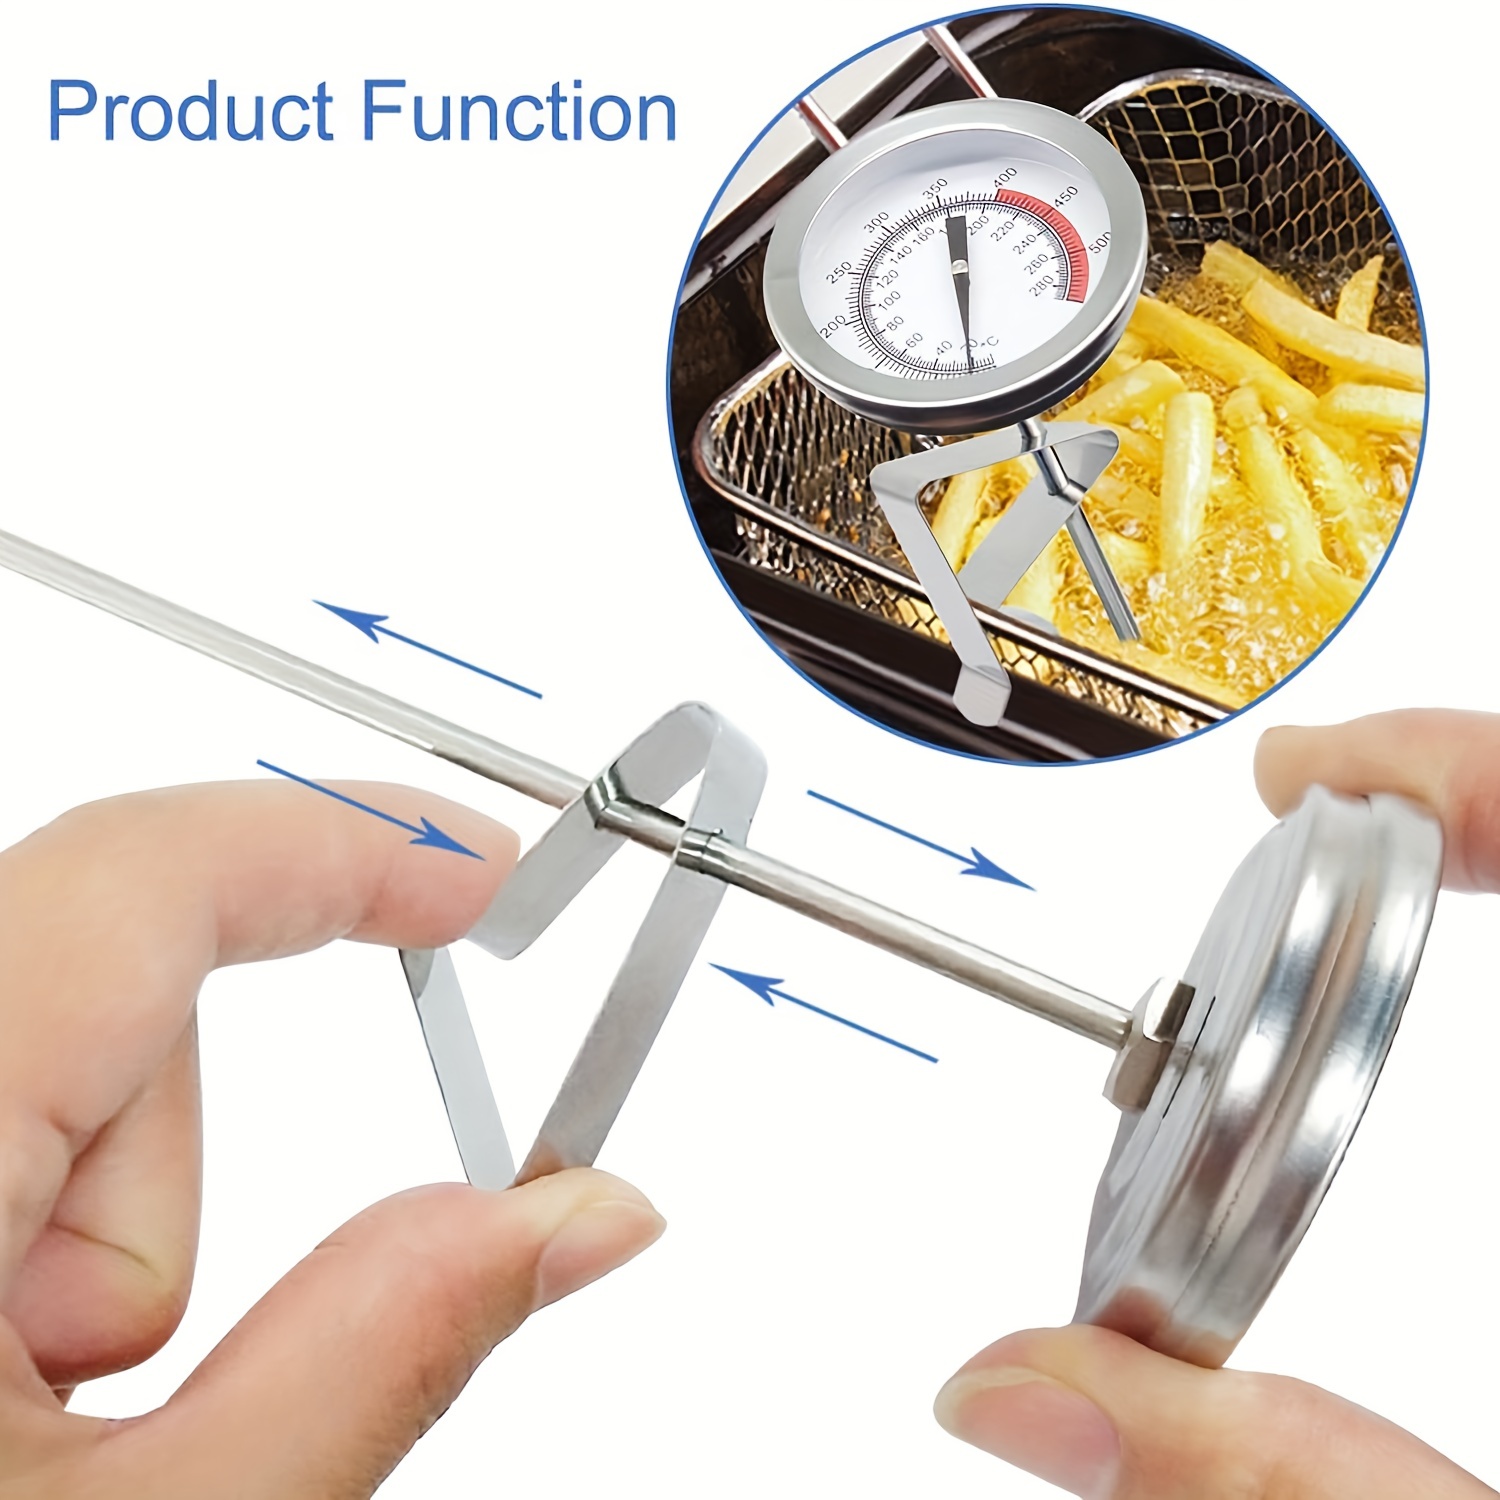 12 Meat Cooking Thermometer Stainless Steel Stem BBQ Grill Turkey